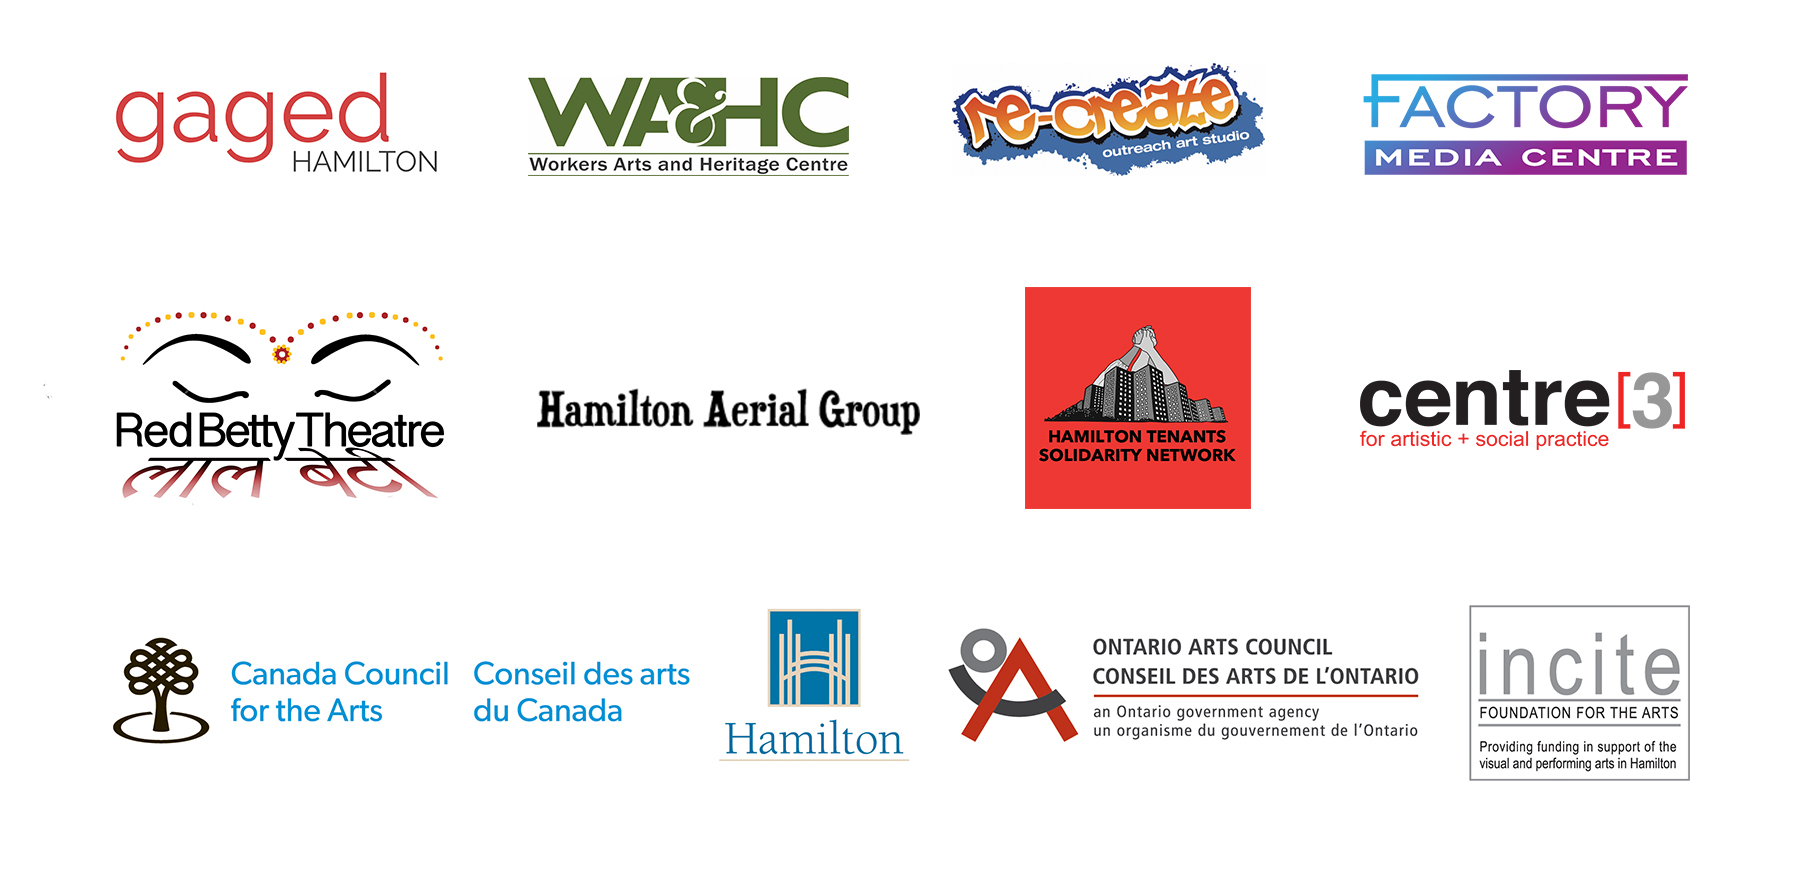 An Image of the various logos of Pressure Points’ funding and programming partners: Gaged Hamilton, Workers Arts and Heritage Centre, Re-Create Outreach Art Studio, Factory Media Centre, Red Betty Theatre, Hamilton Aerial Group, Hamilton Tenants Solidarity Network, Centre[3] for artistic + social practice, Canada Council for the Arts, The City of Hamilton, Ontario Arts Council and Incite Foundation for the Arts.